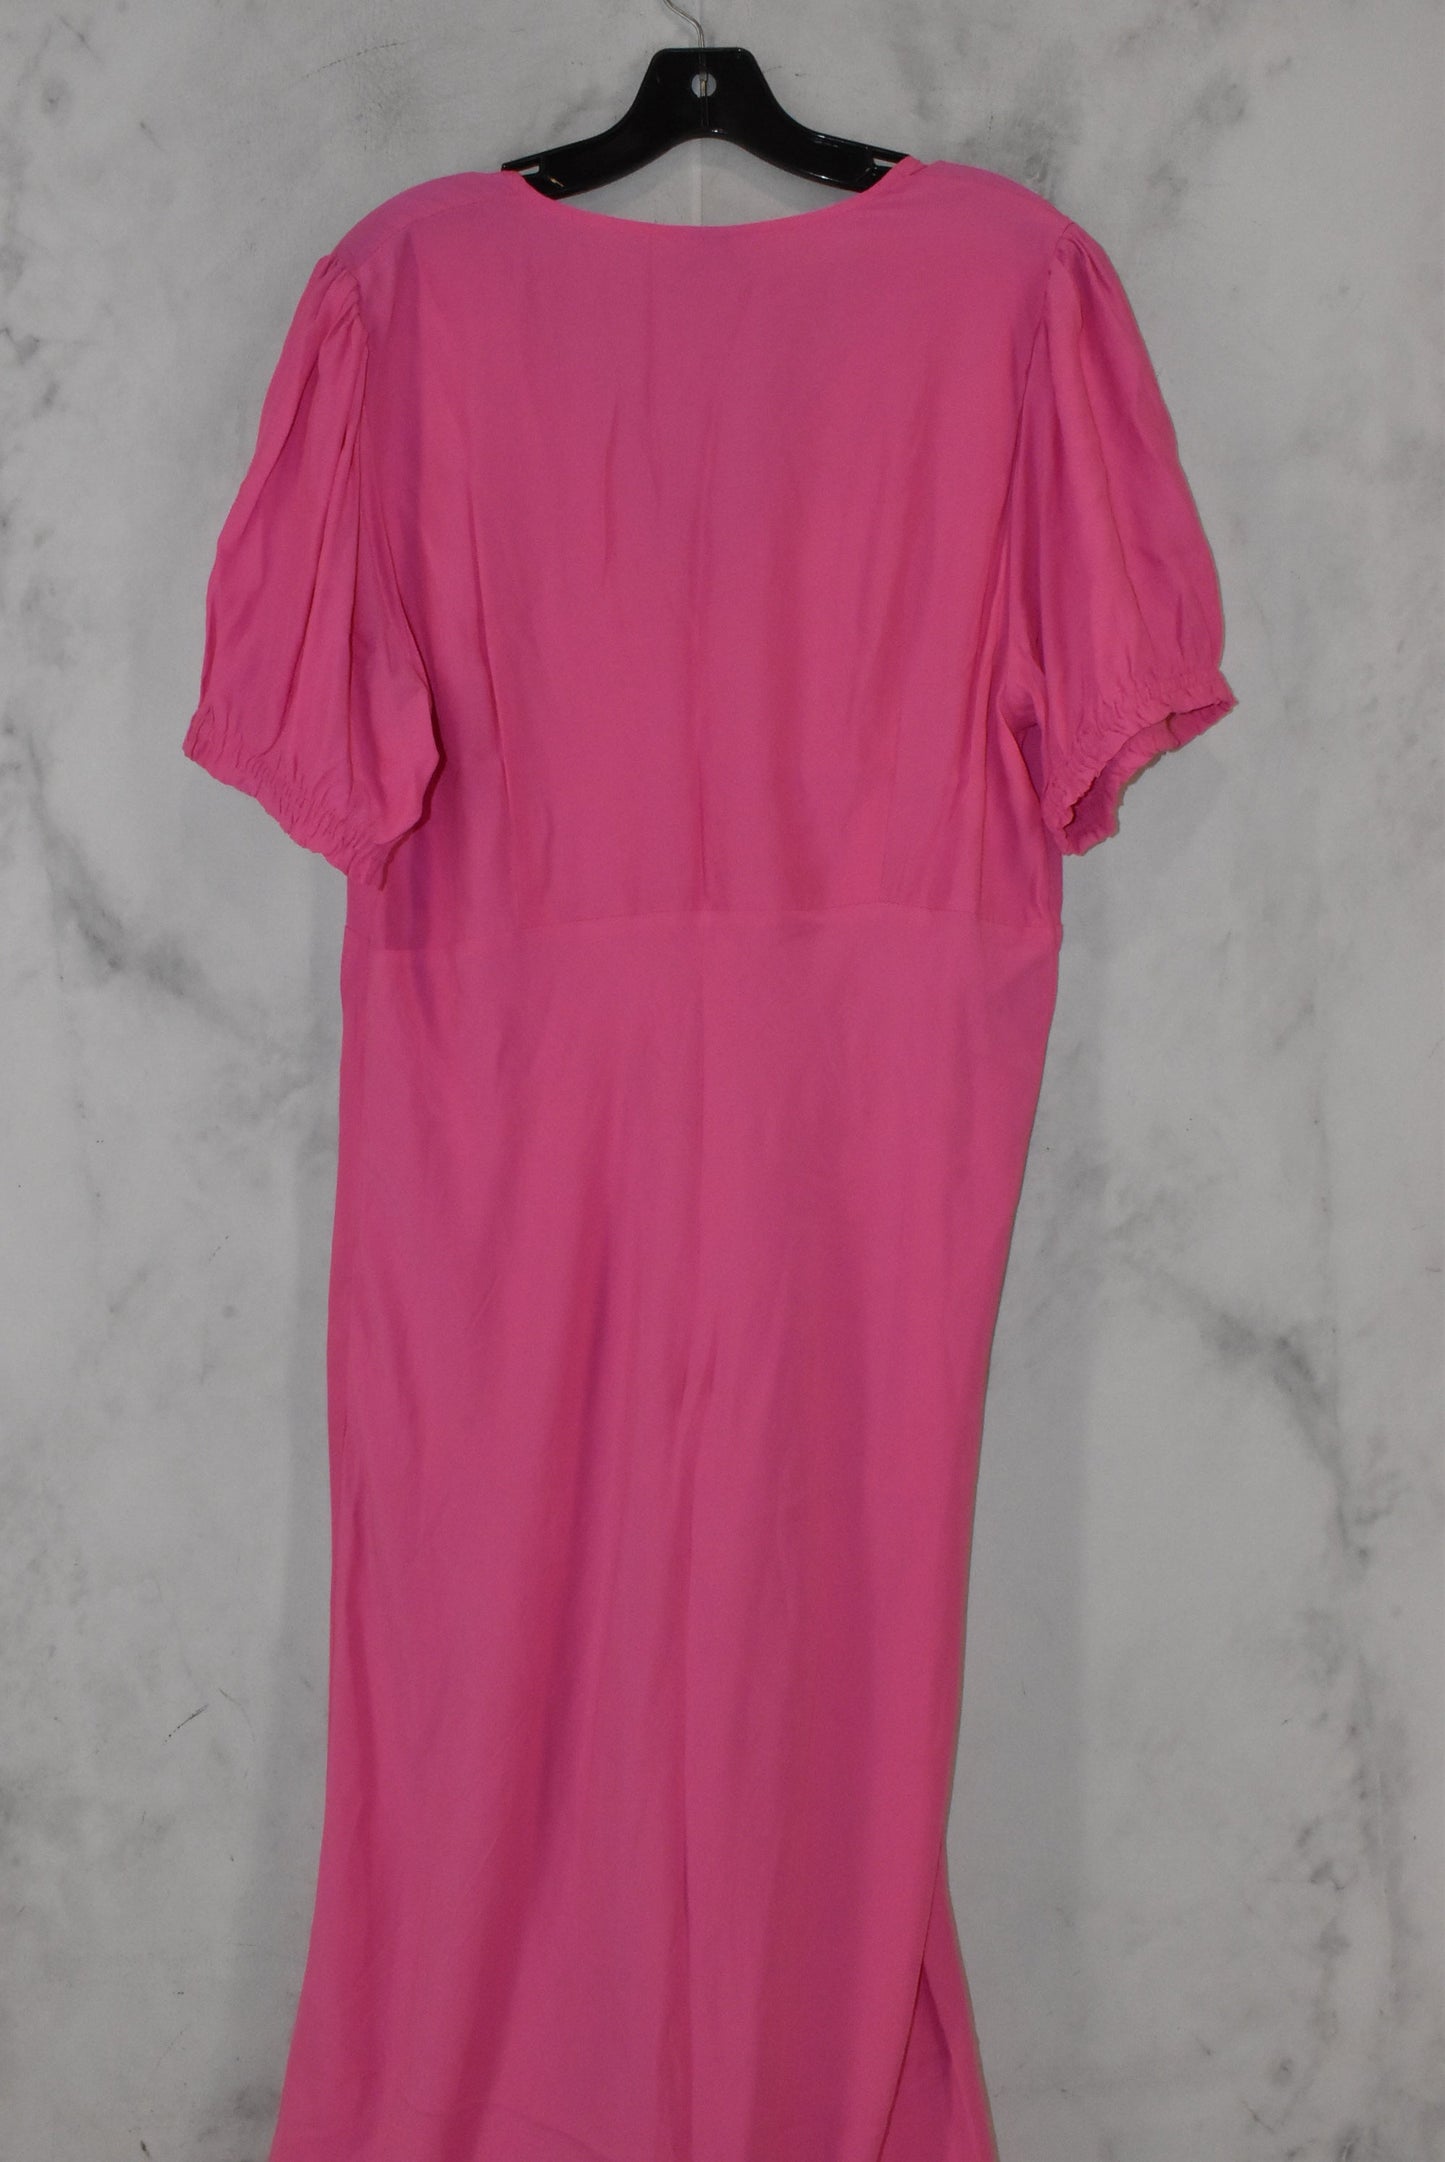 Dress Casual Maxi By A New Day  Size: L